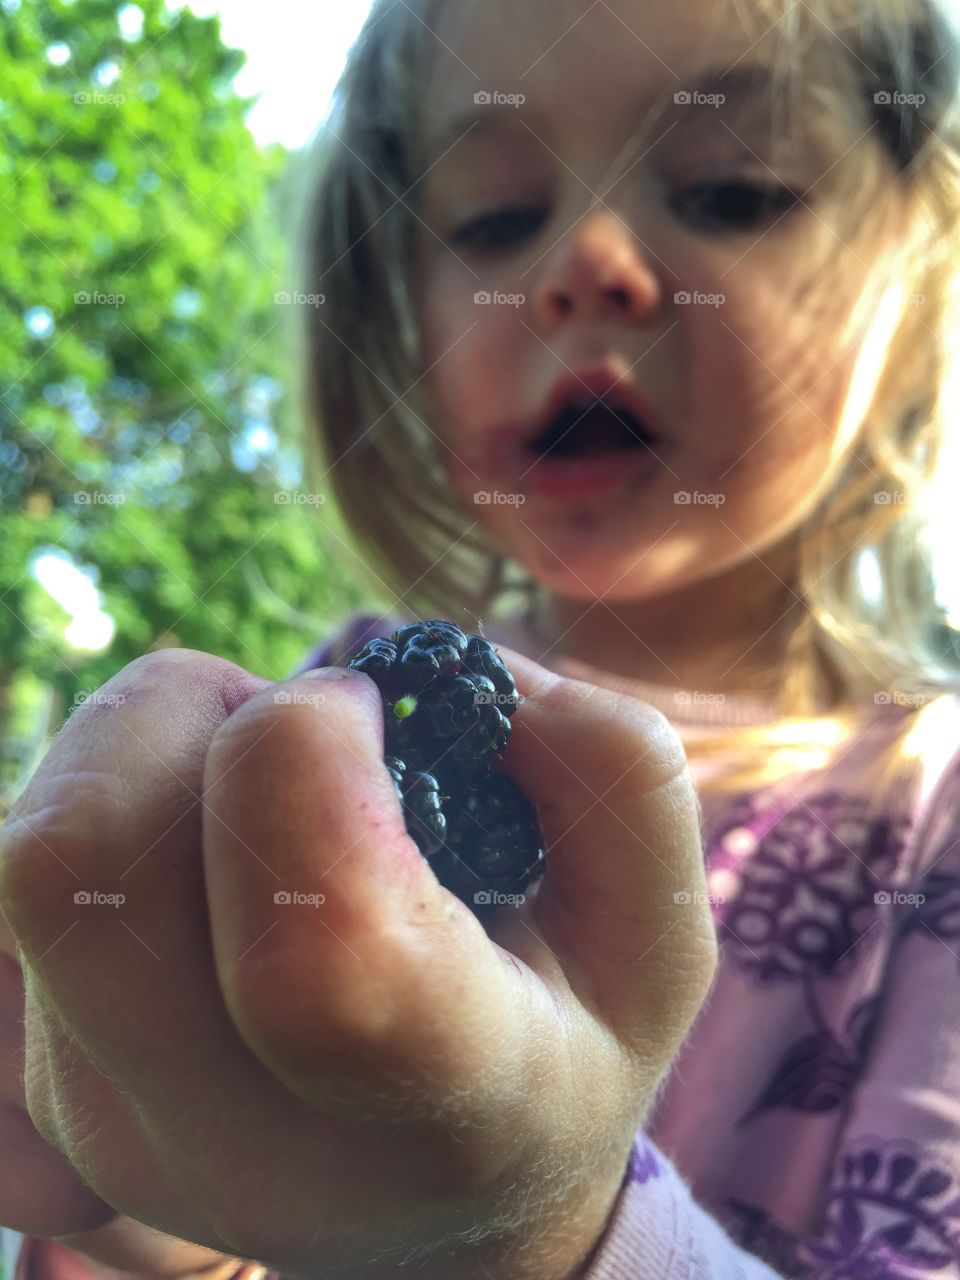 Small child holding blackberry in hand